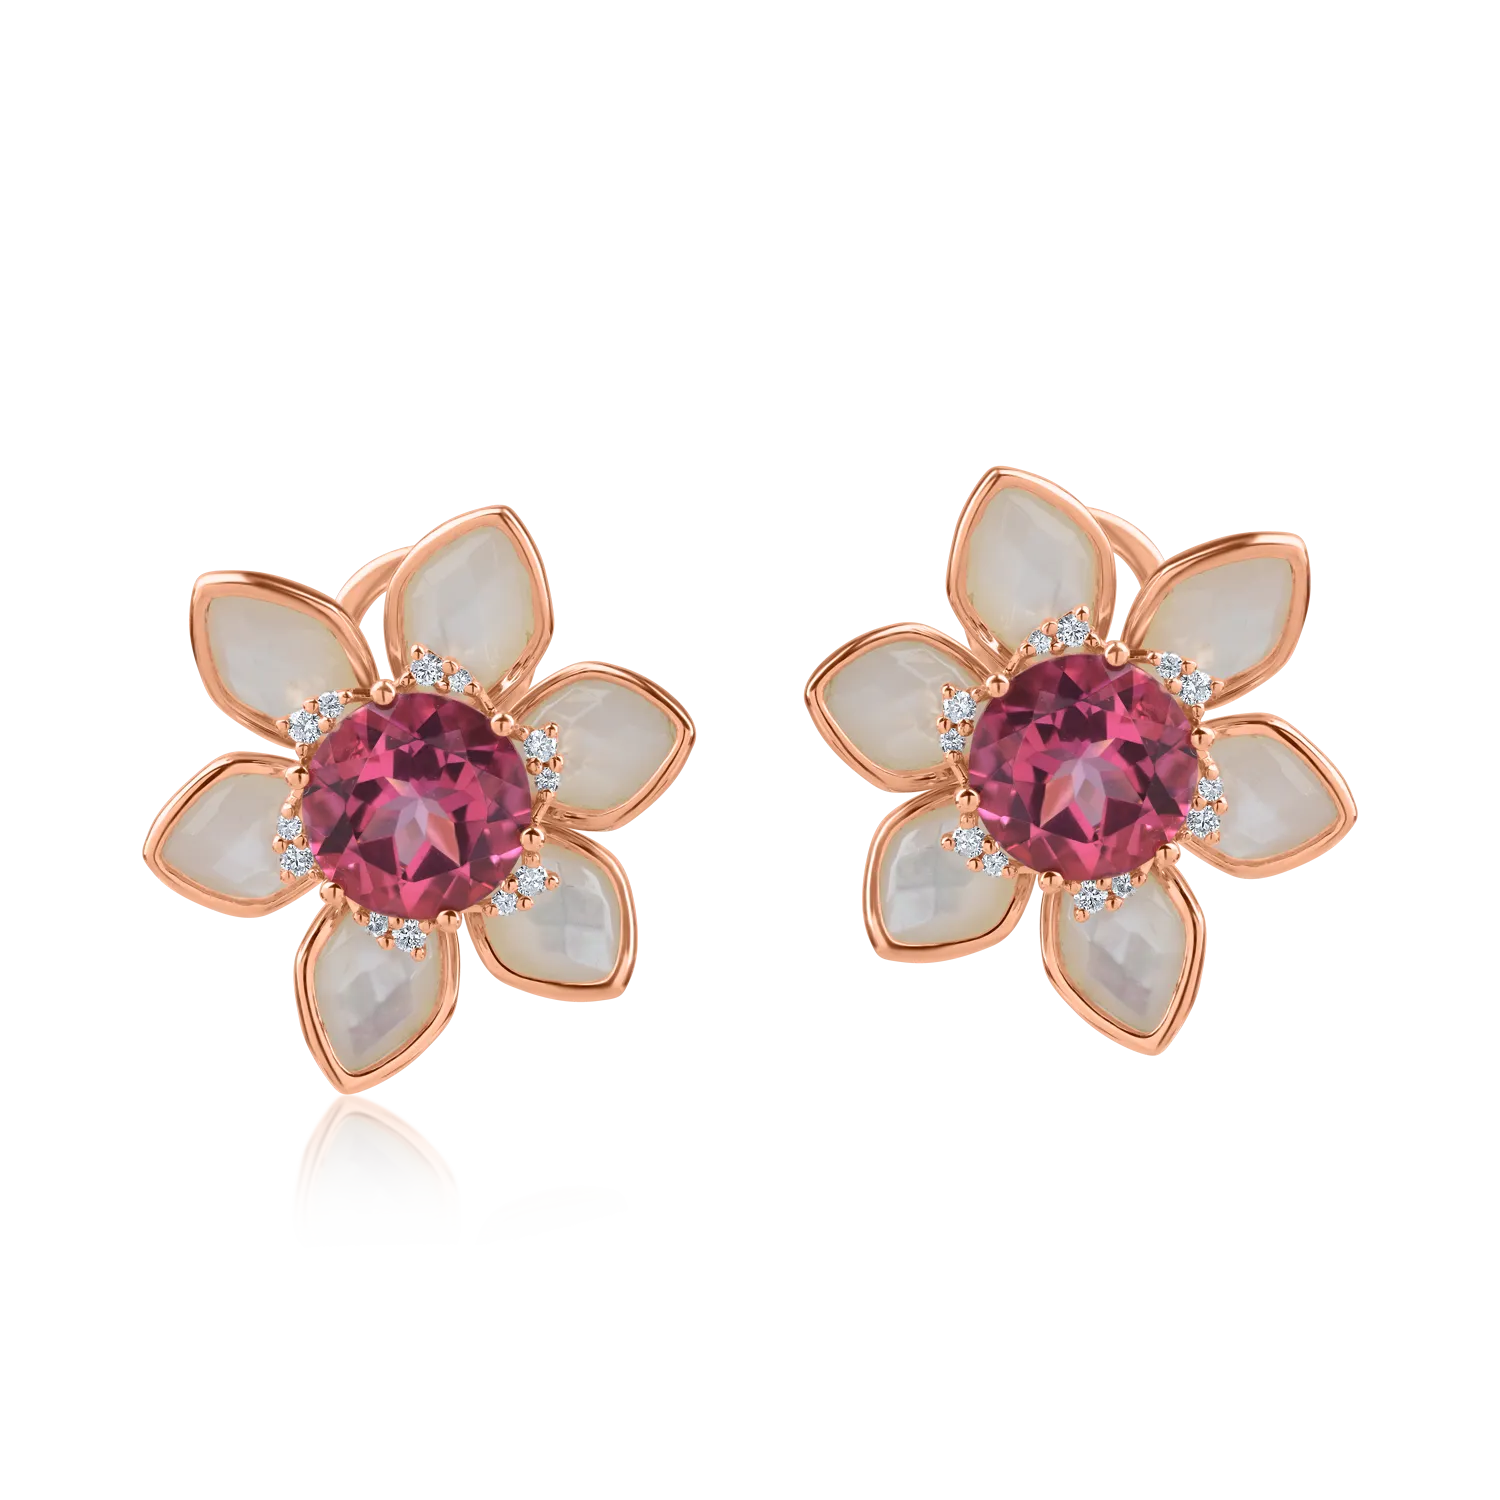 Rose gold flower earrings with 11.7ct semi-precious stones